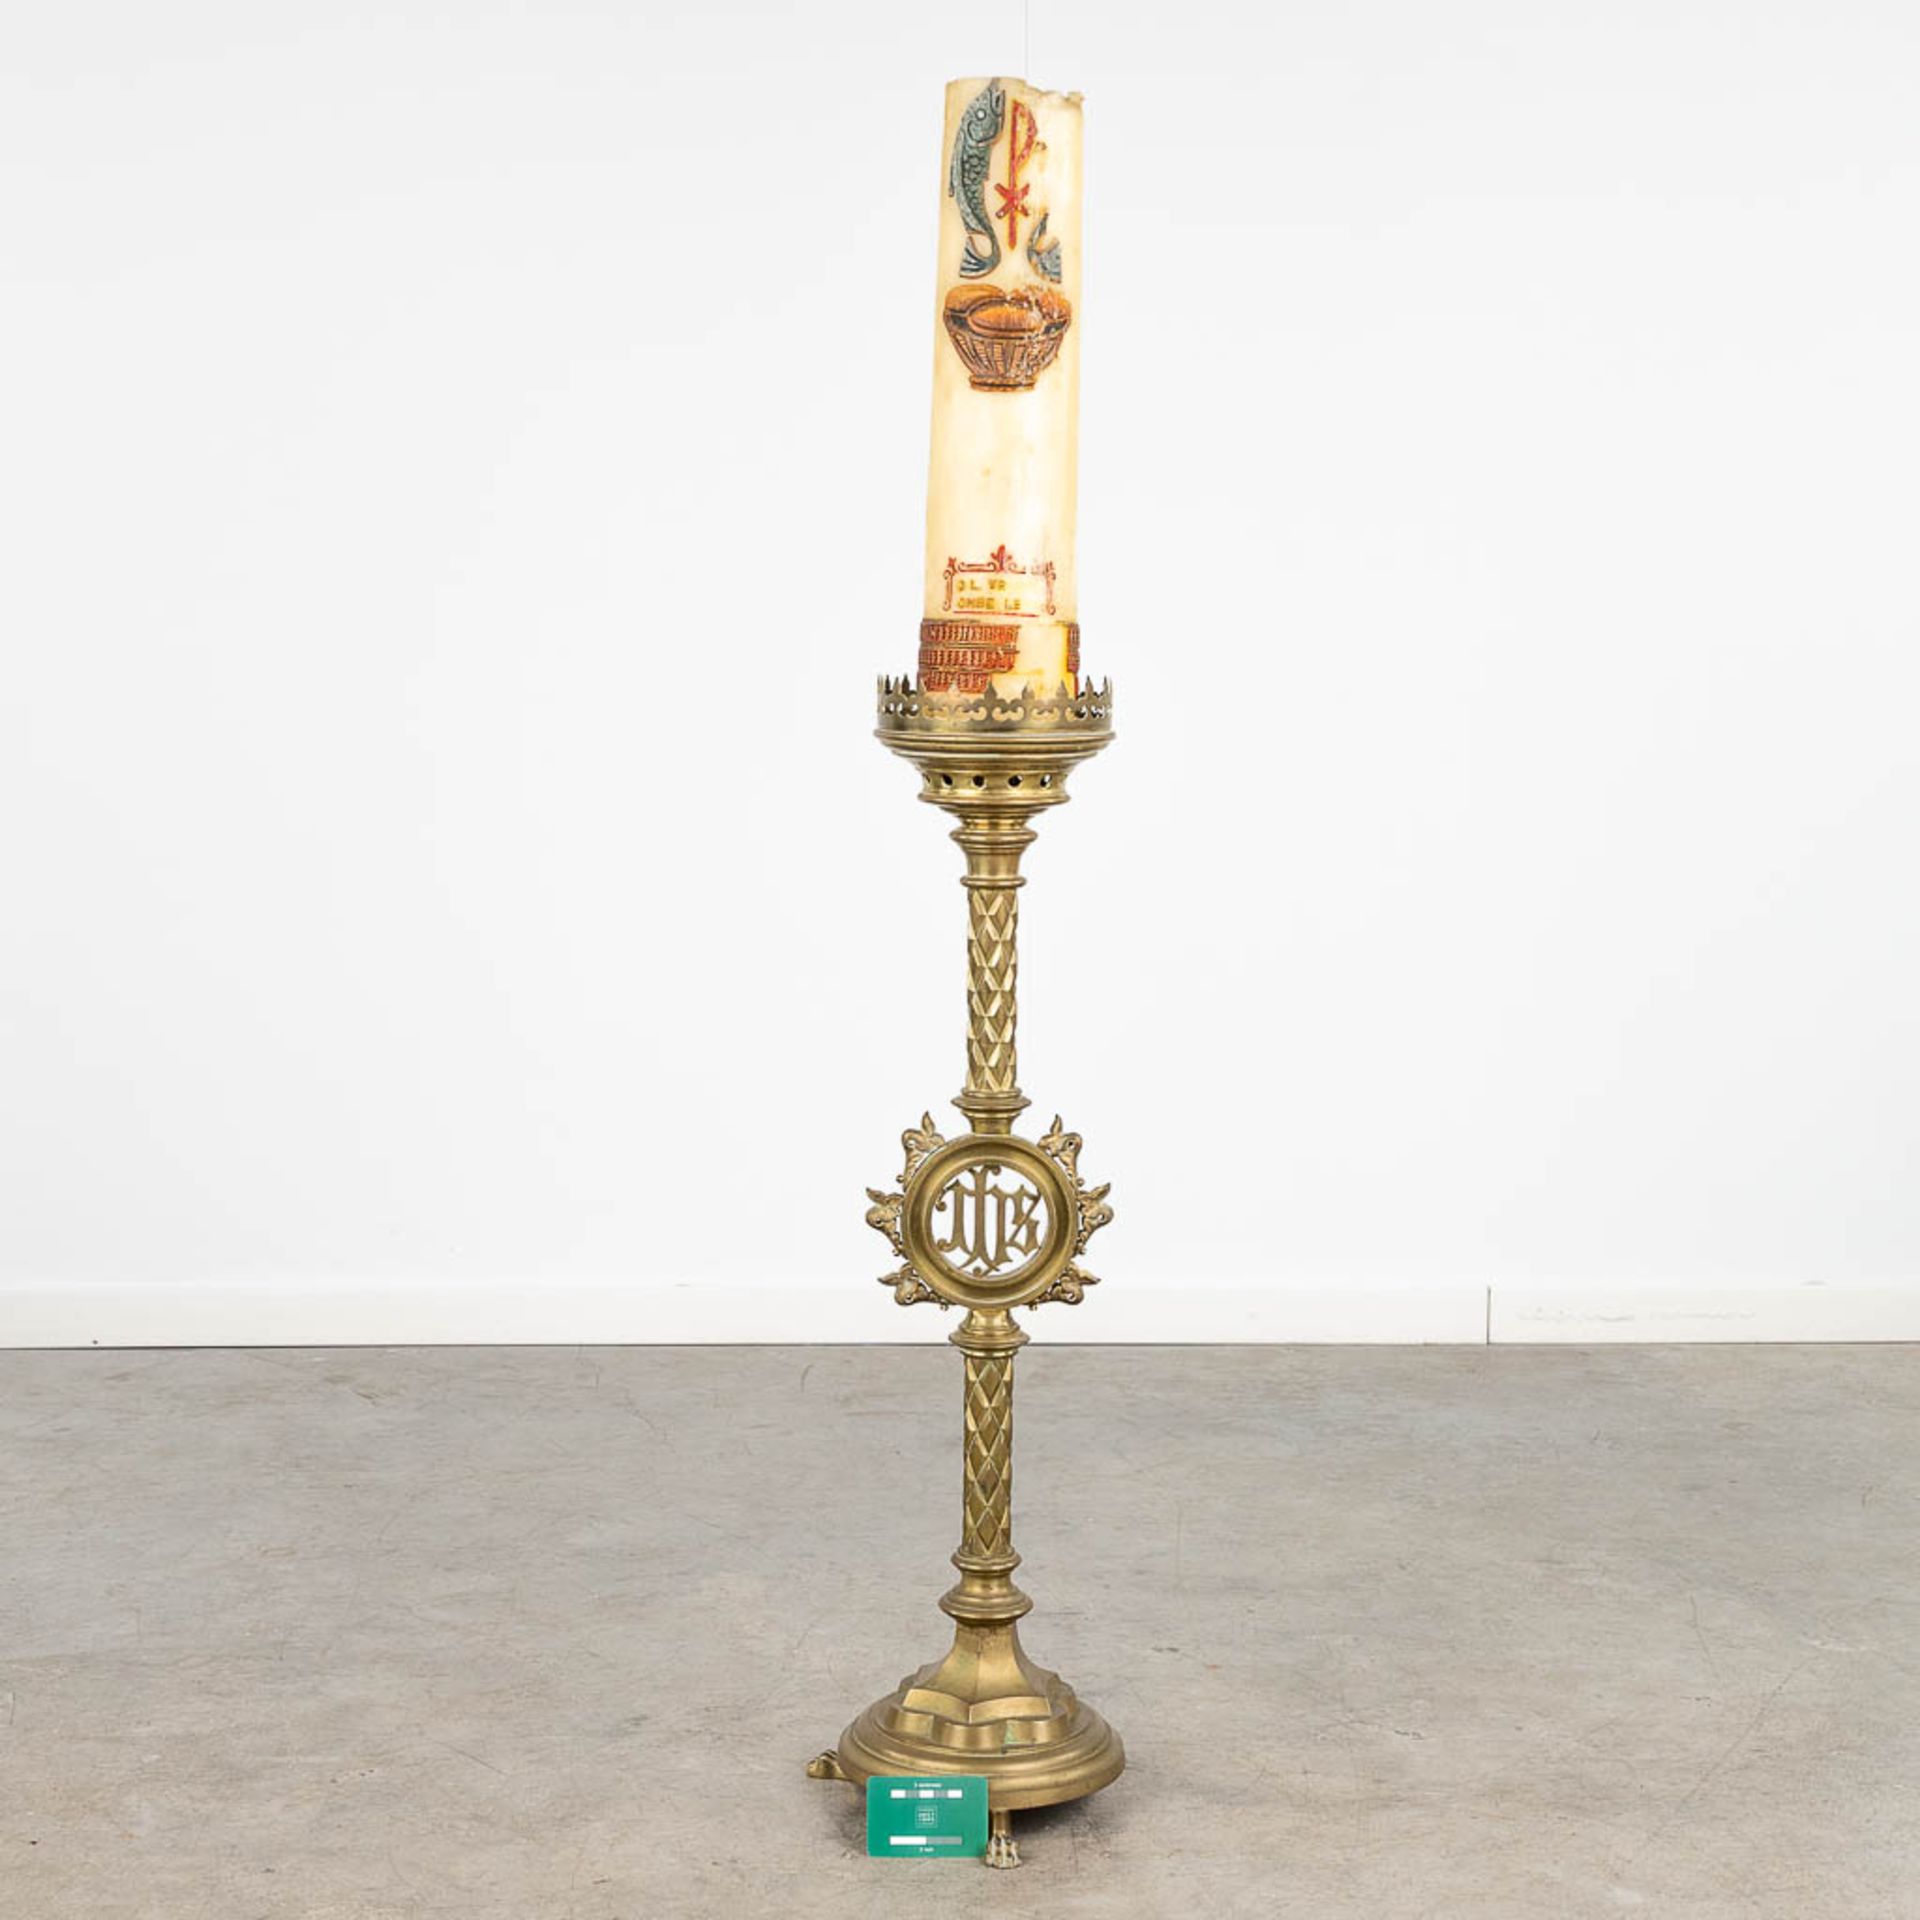 A large candlestick made of bronze, decorated with IHS logo. Gothic Revival style. (H: 92 cm) - Image 2 of 10